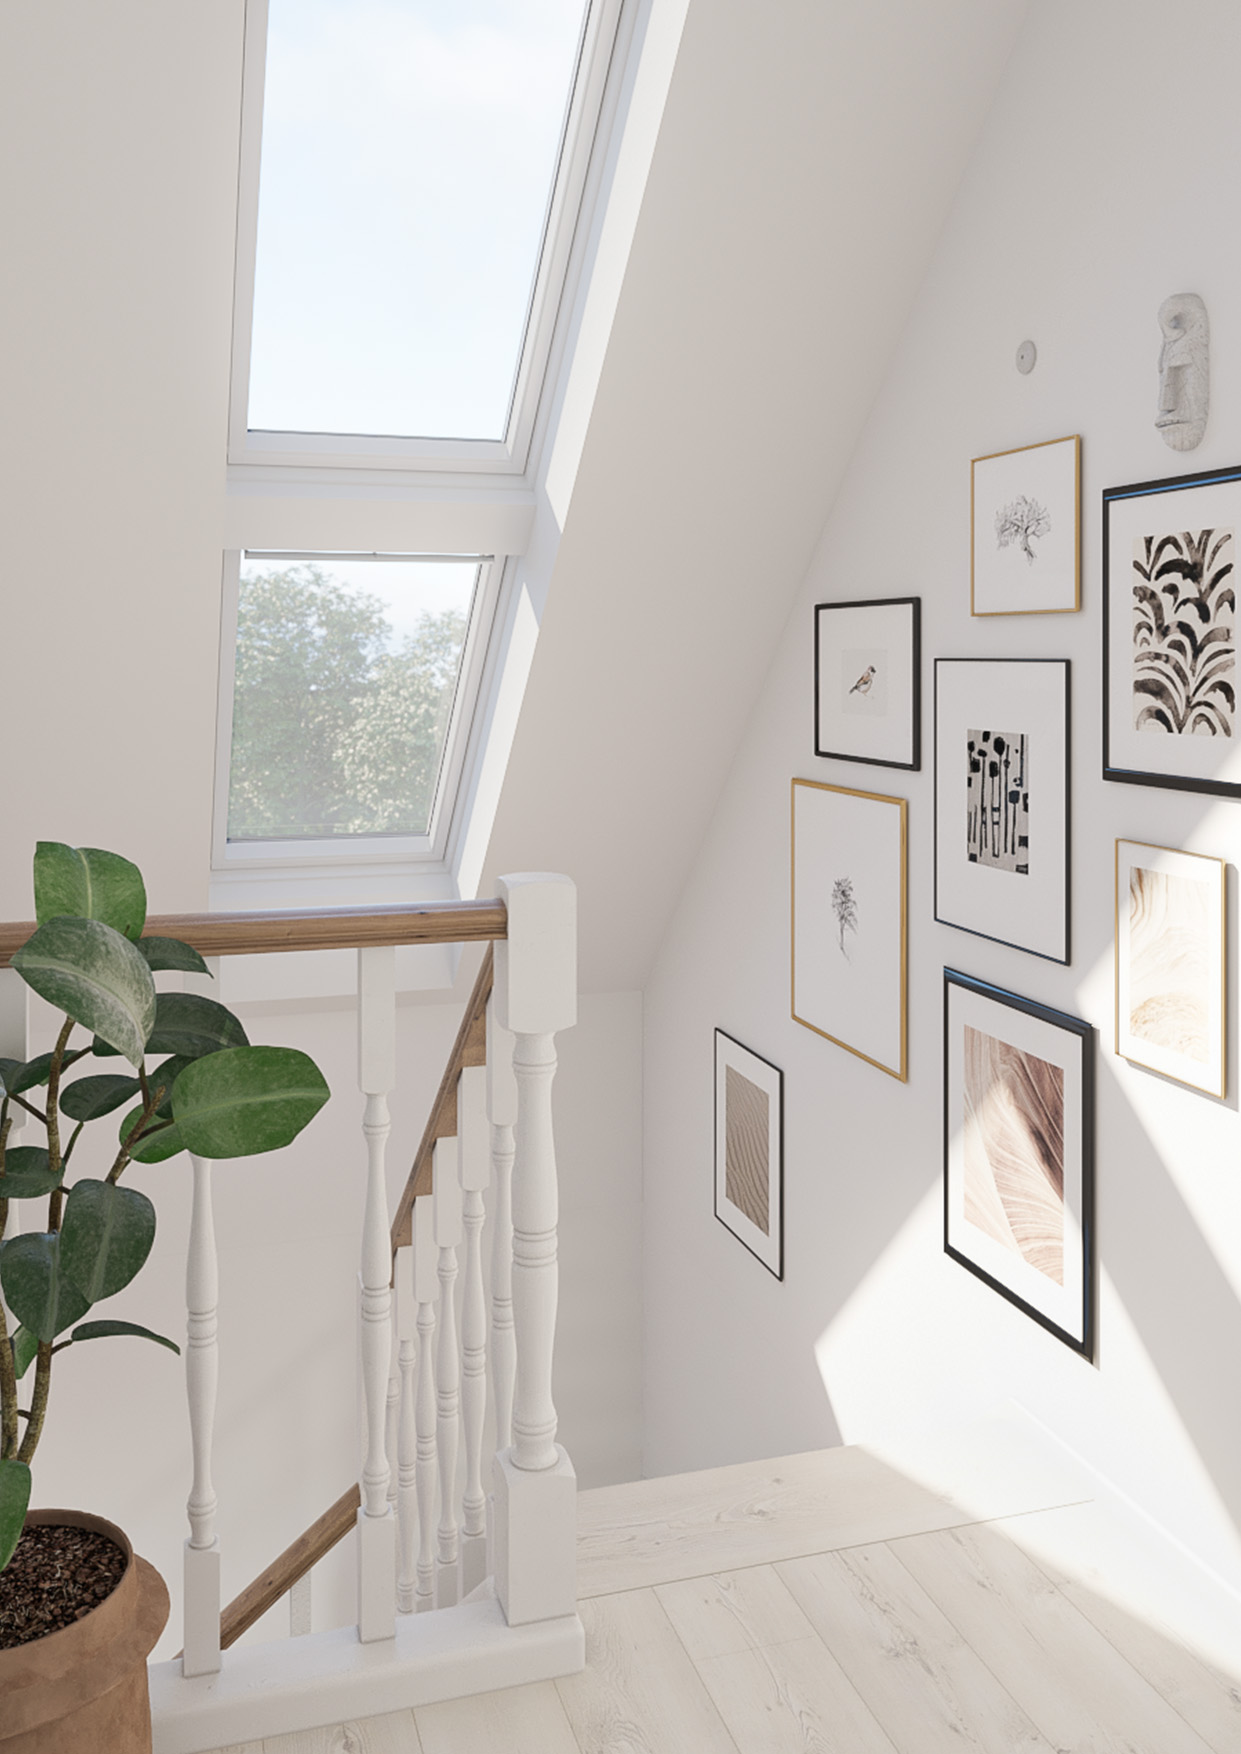 A staircase area with white walls and a painting collage on the right side wall